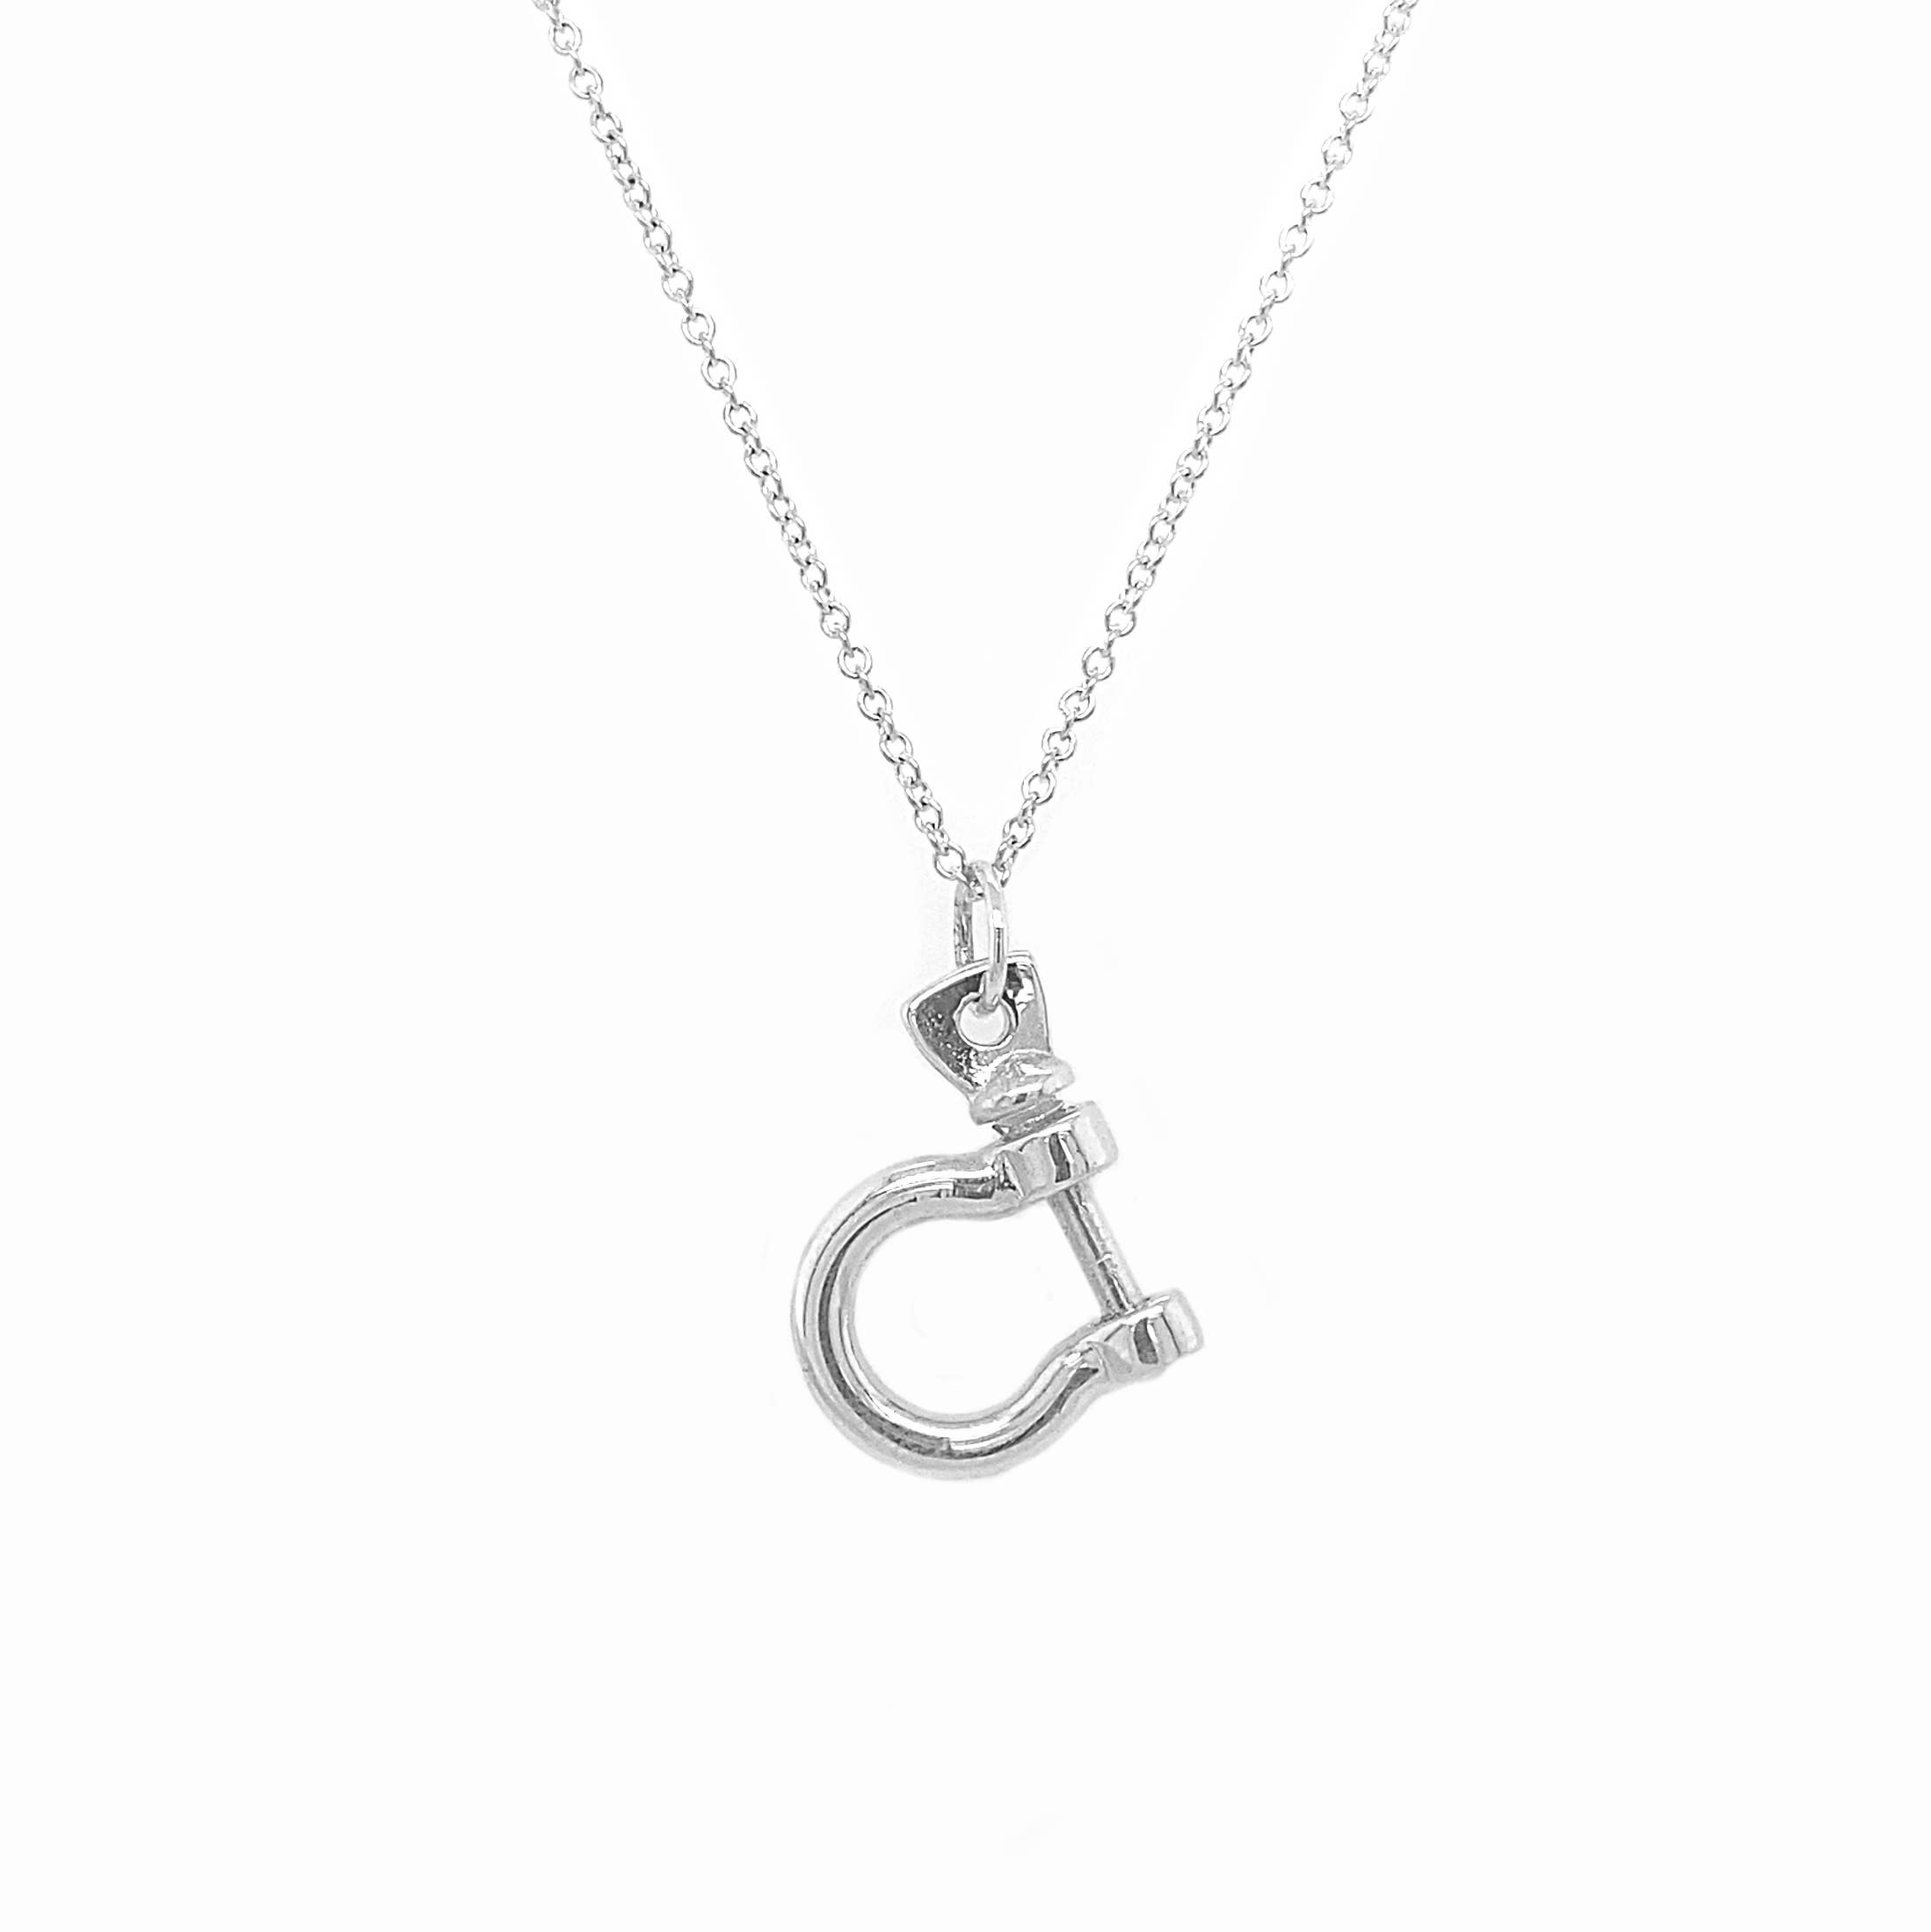 Large Cleat Necklace – The Golden Cleat